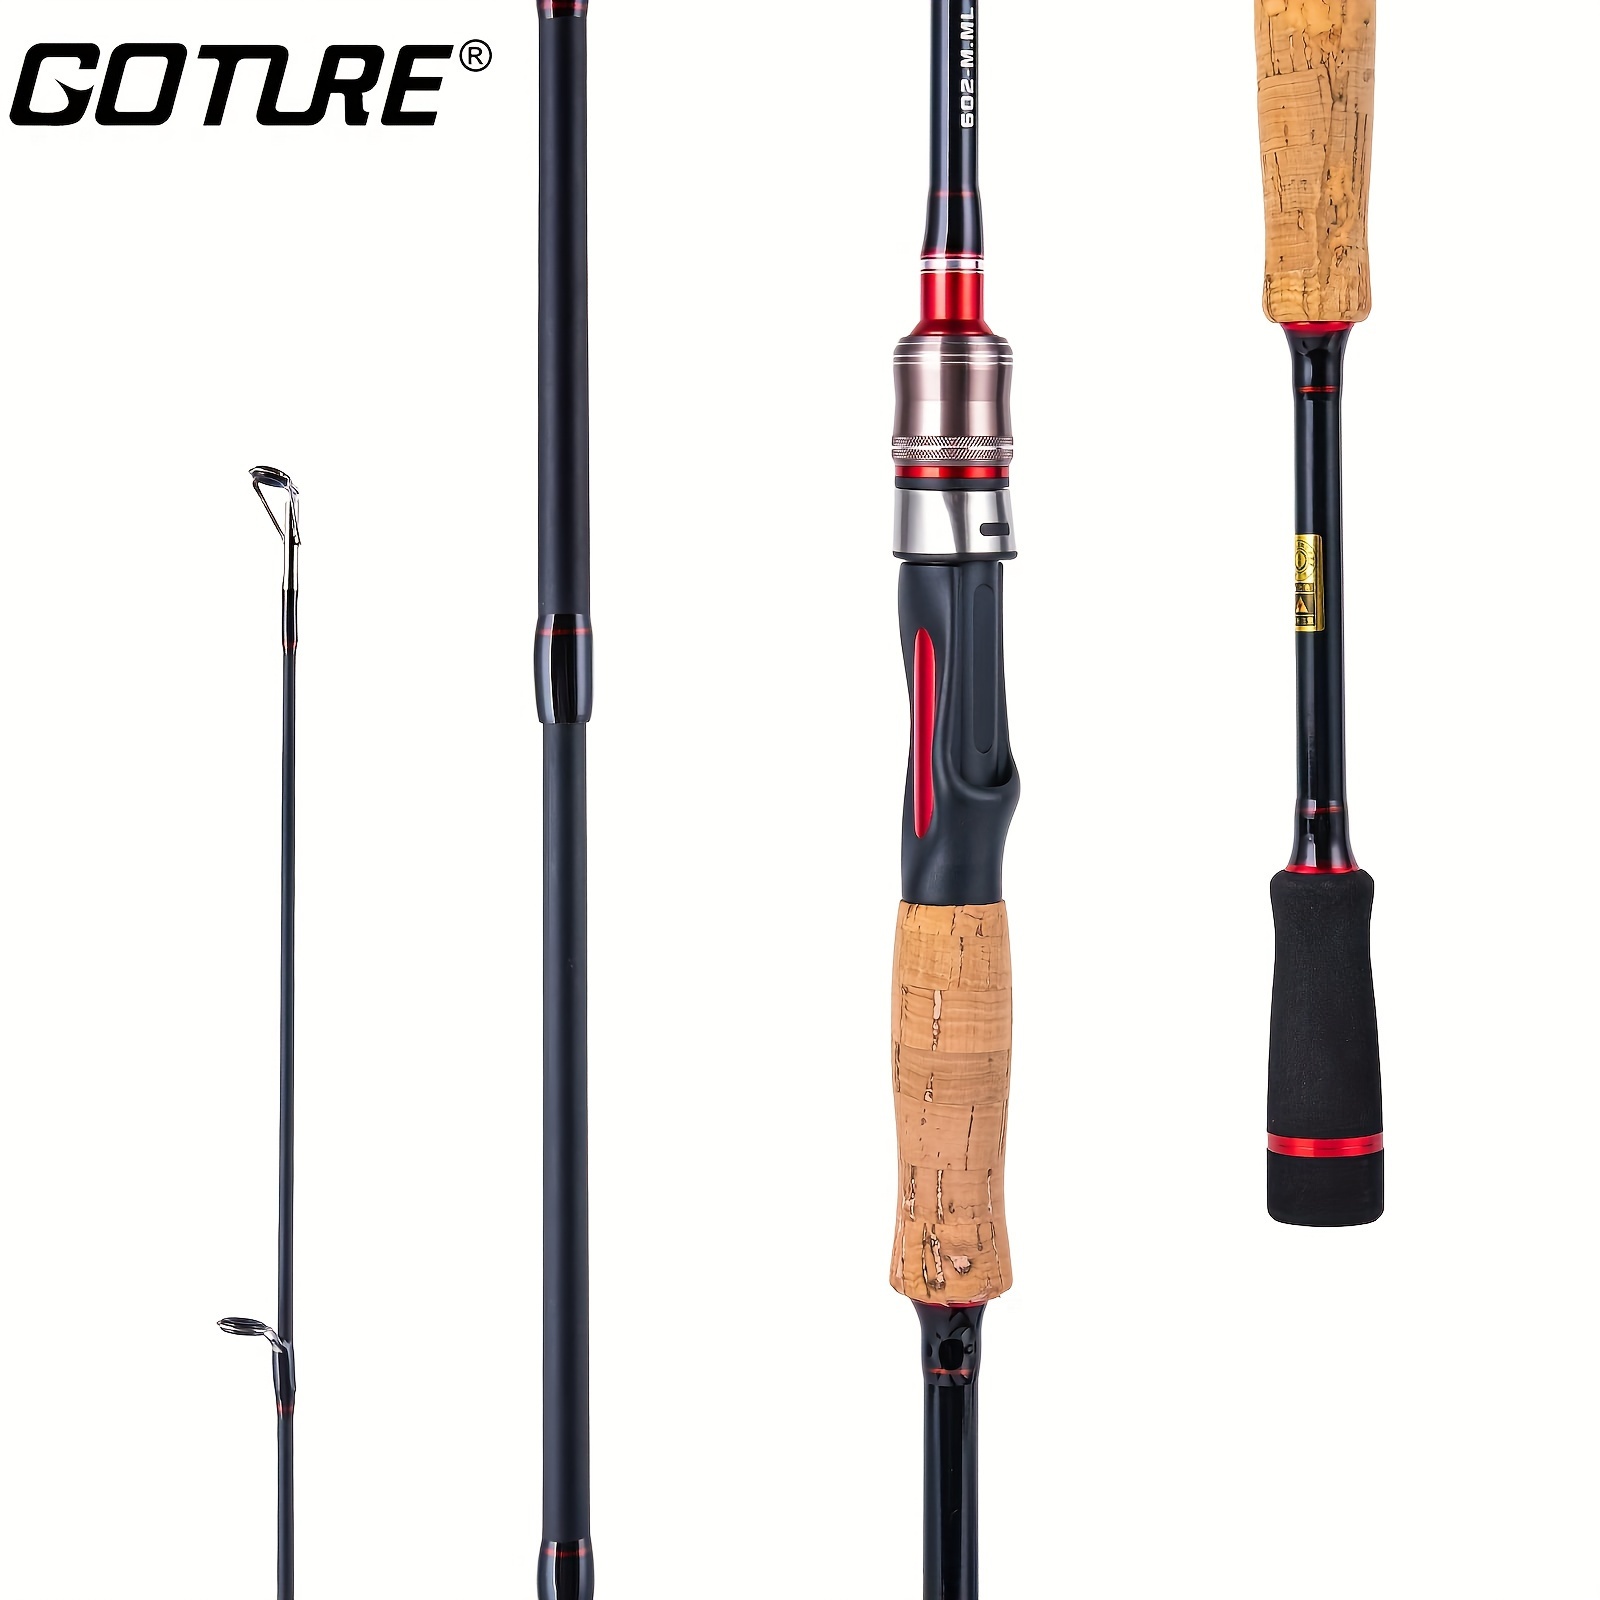  Fishing Pole Combo, 6.9ft 2Pcs Telescopic Rods Set,  Collapsible Carbon Fiber Fishing Rods, 2PCS Spinning Reel Set with Carrier  Bag Freshwater Fishing Rod and Reel Combos Kits(Blue and Purple) 